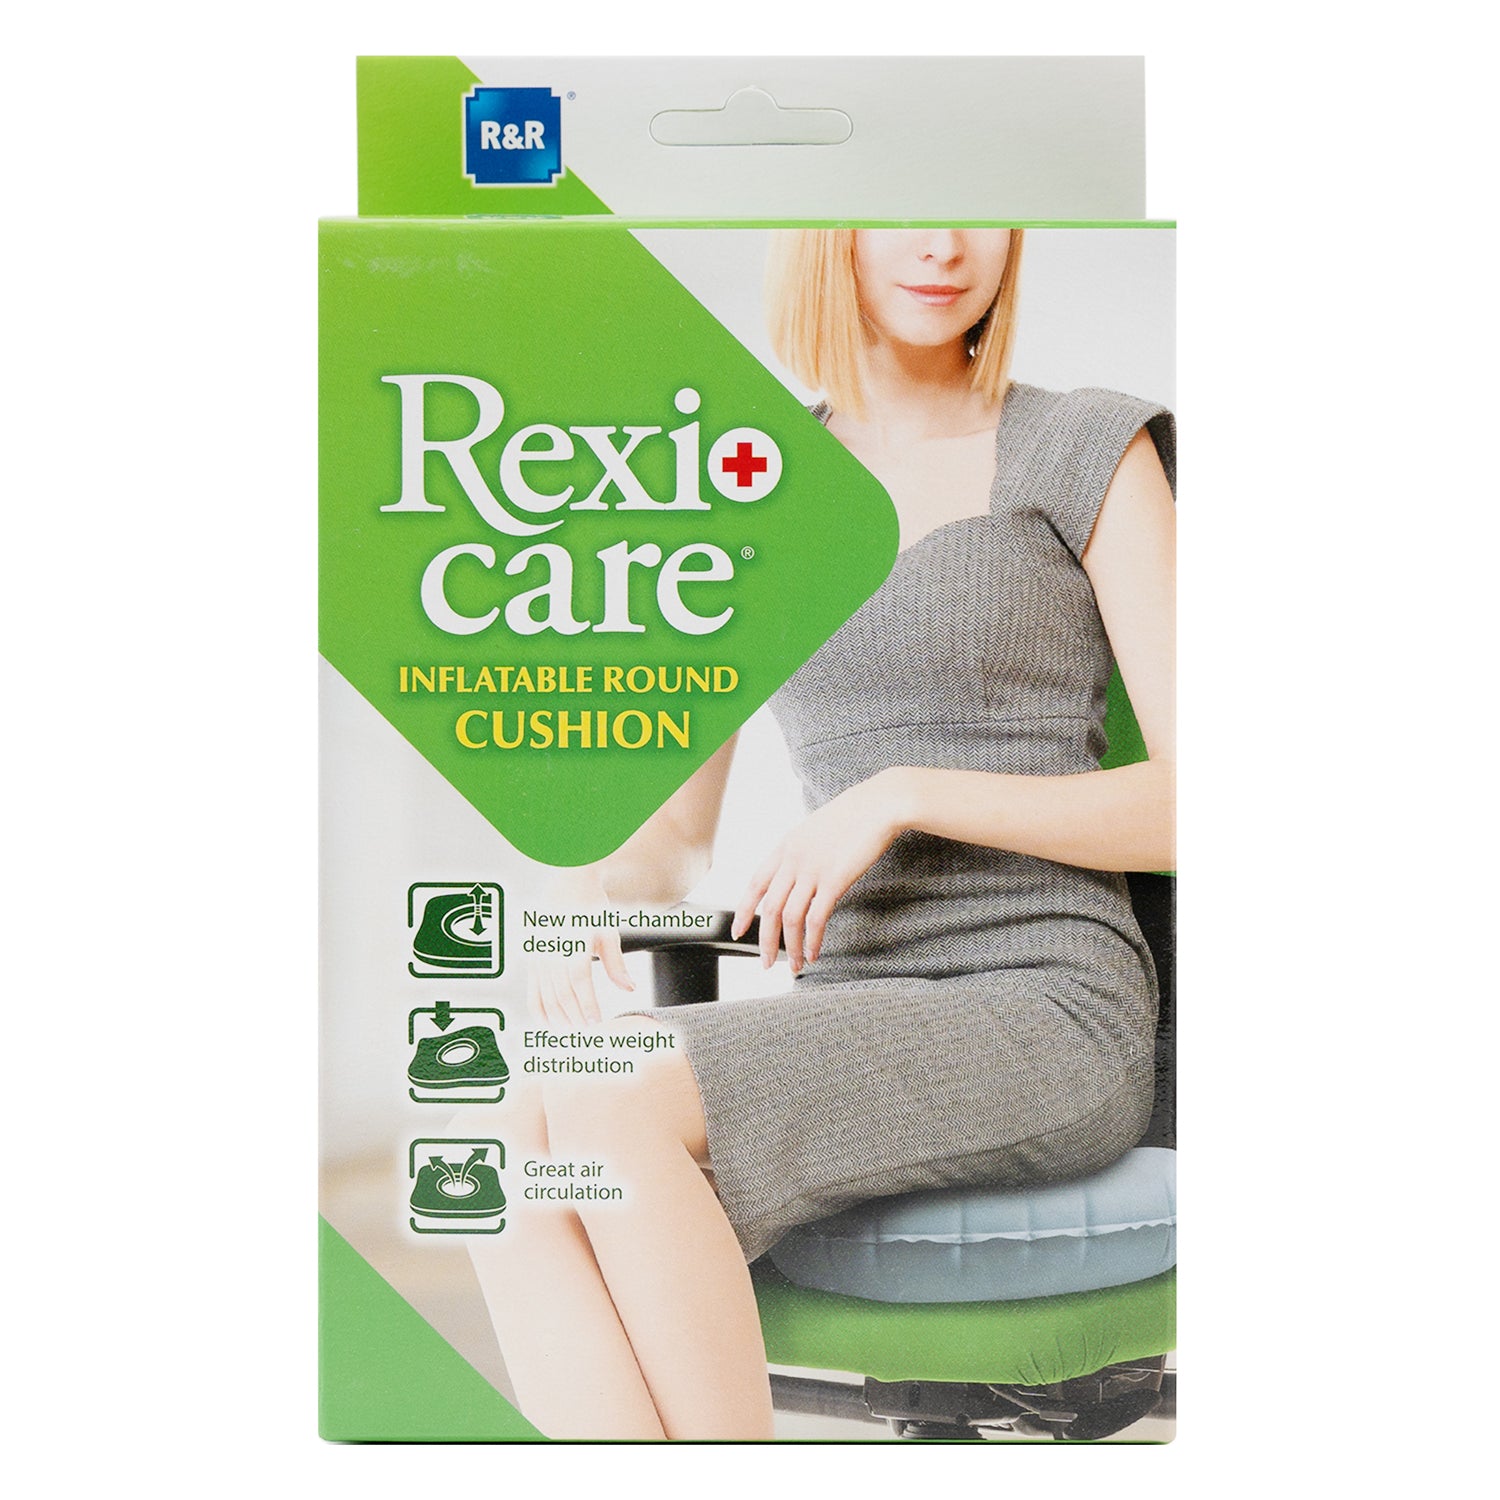 RR REXI CARE INFLATABLE ROUND CUSHION SU-8202